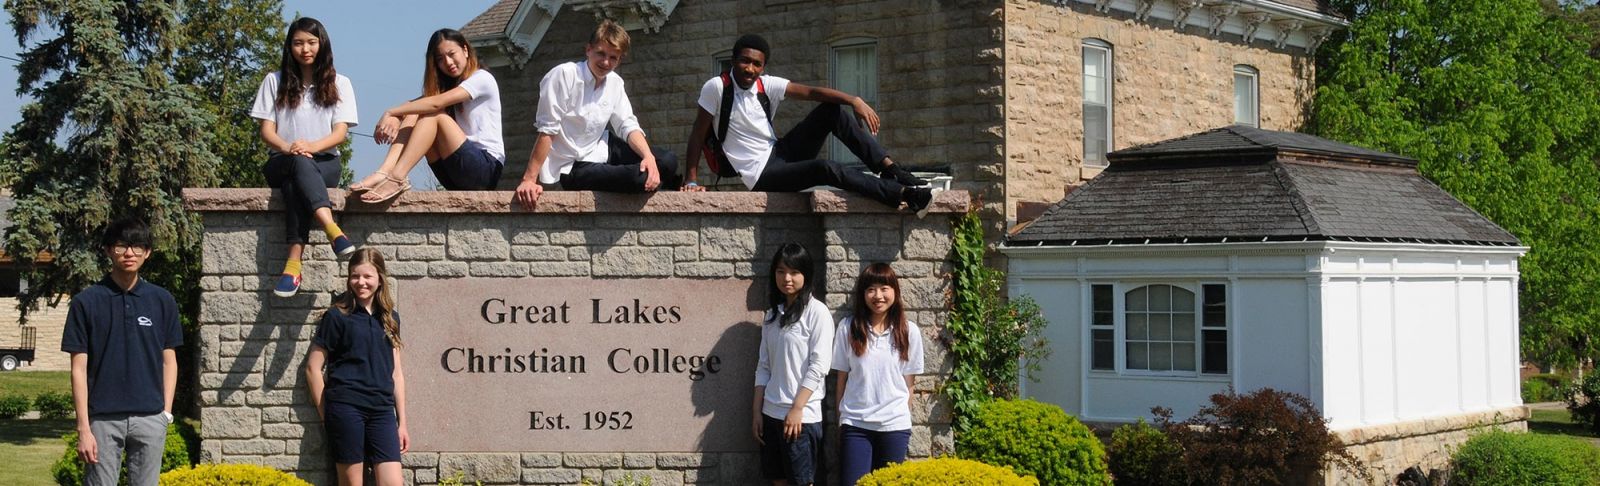 GREAT LAKES COLLEGE OF TORONTO